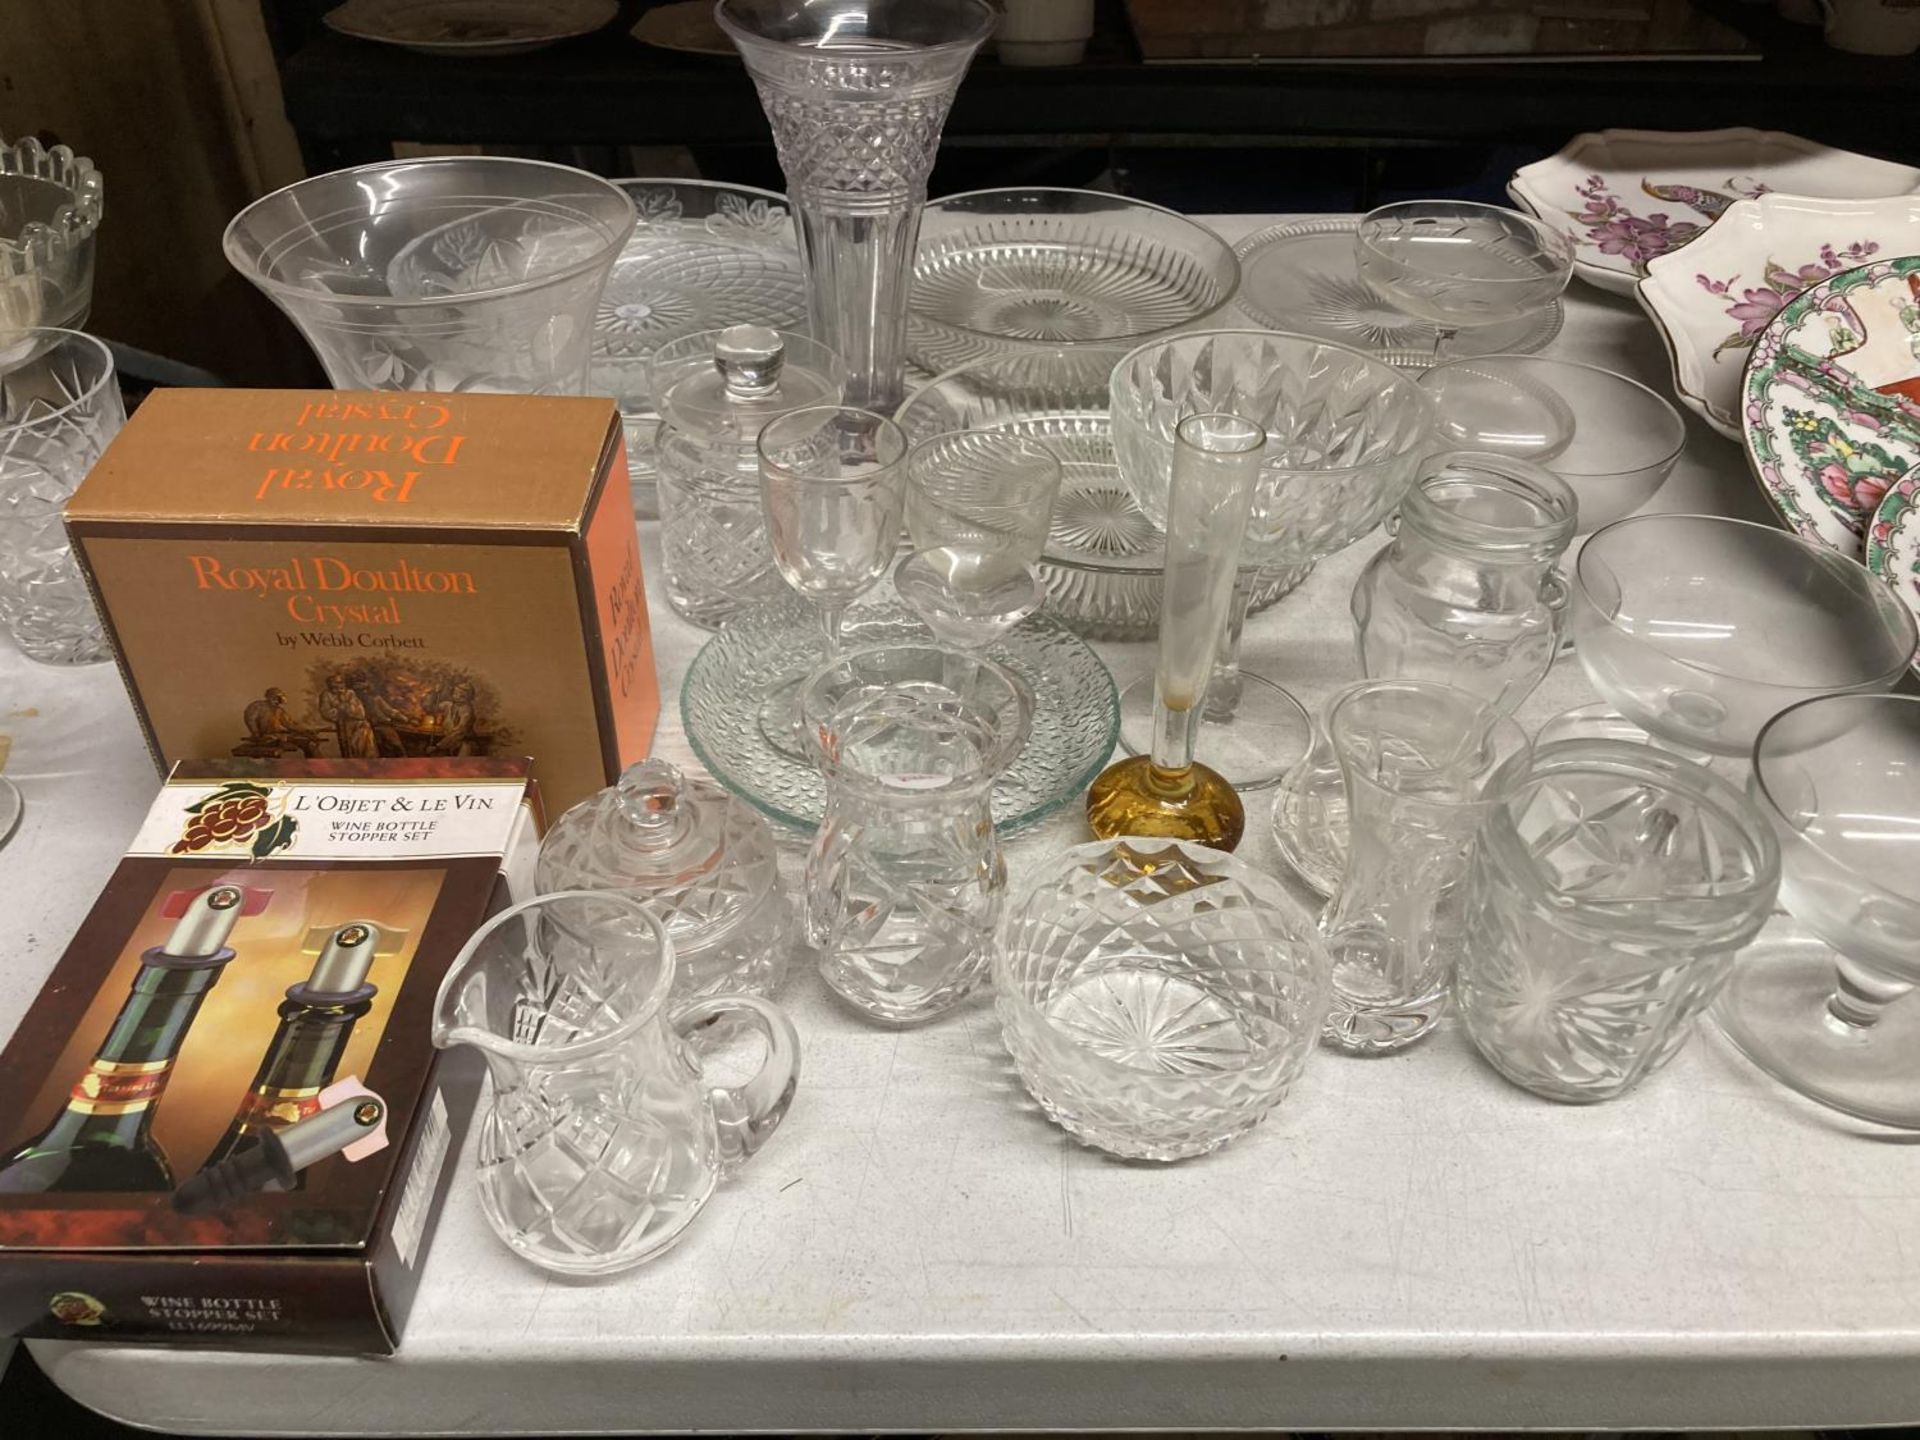 A QUANTITY OF VINTAGE GLASSWARE TO INCLUDE BOWLS, VASES, DESSERT DISHES, LIDDED POTS, GLASSES, ETC - Image 3 of 4